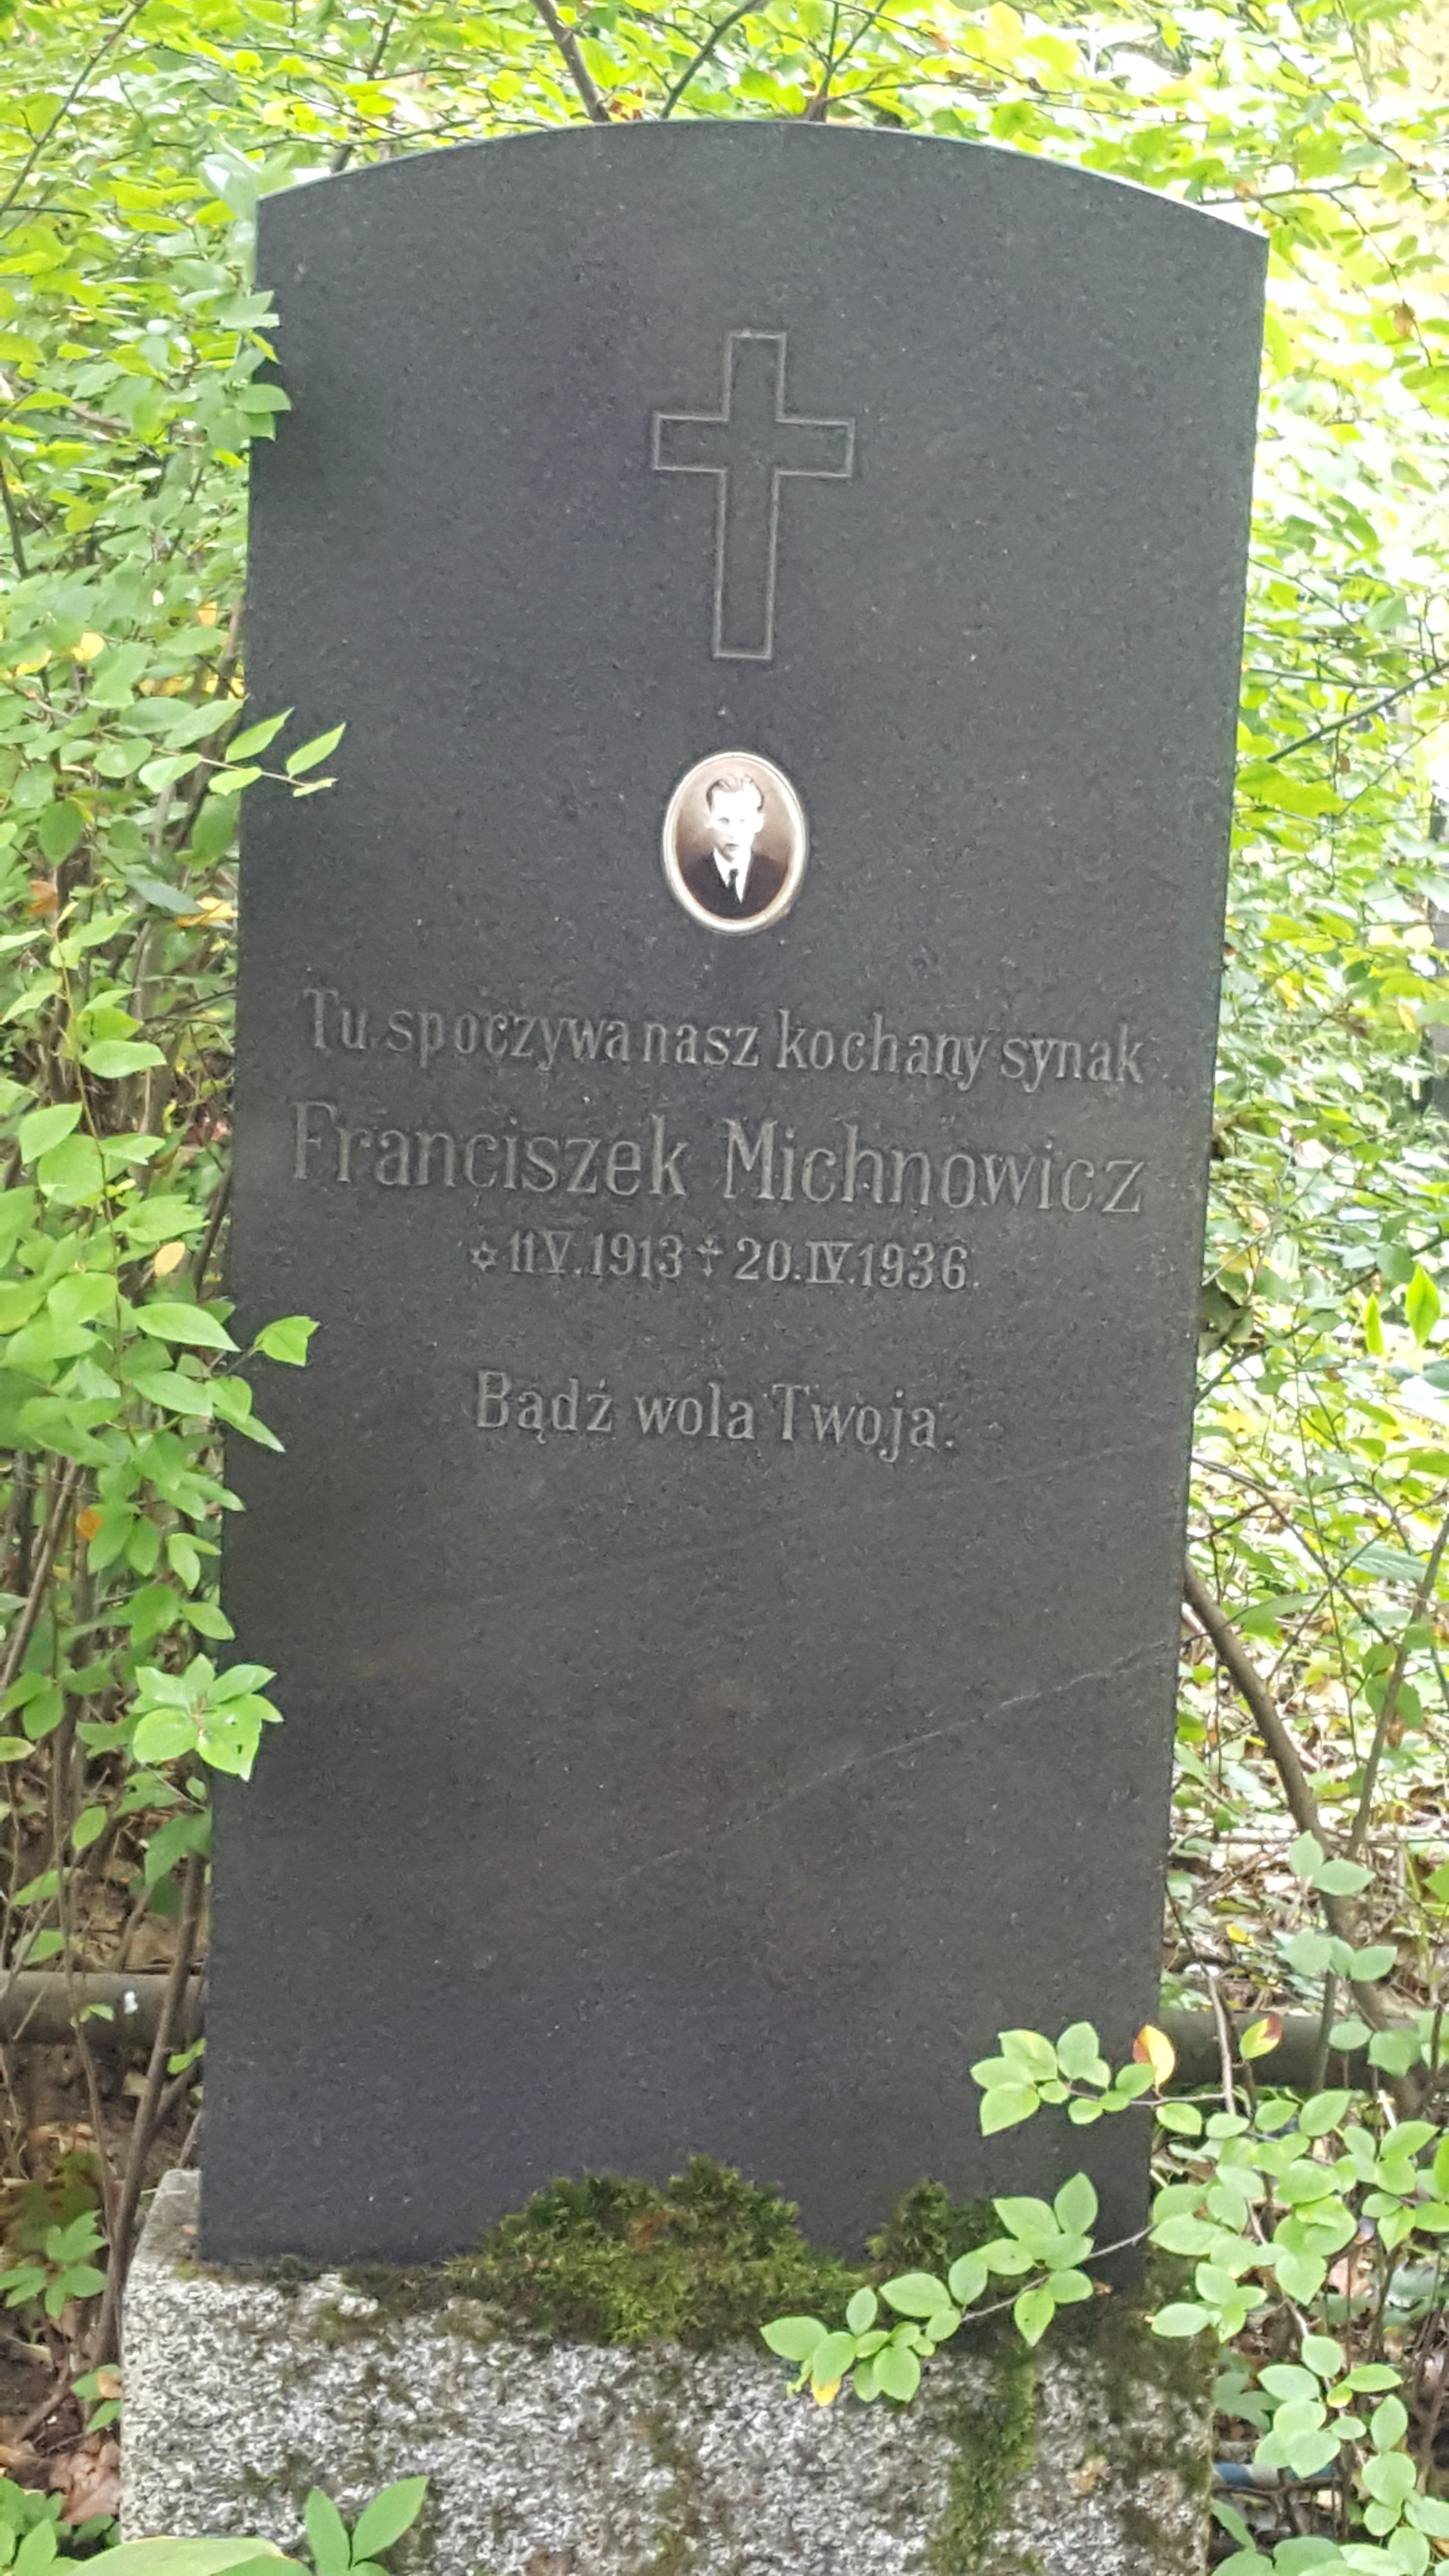 Tombstone of Franciszek Michnowicz, St Michael's cemetery in Riga, 2021 state